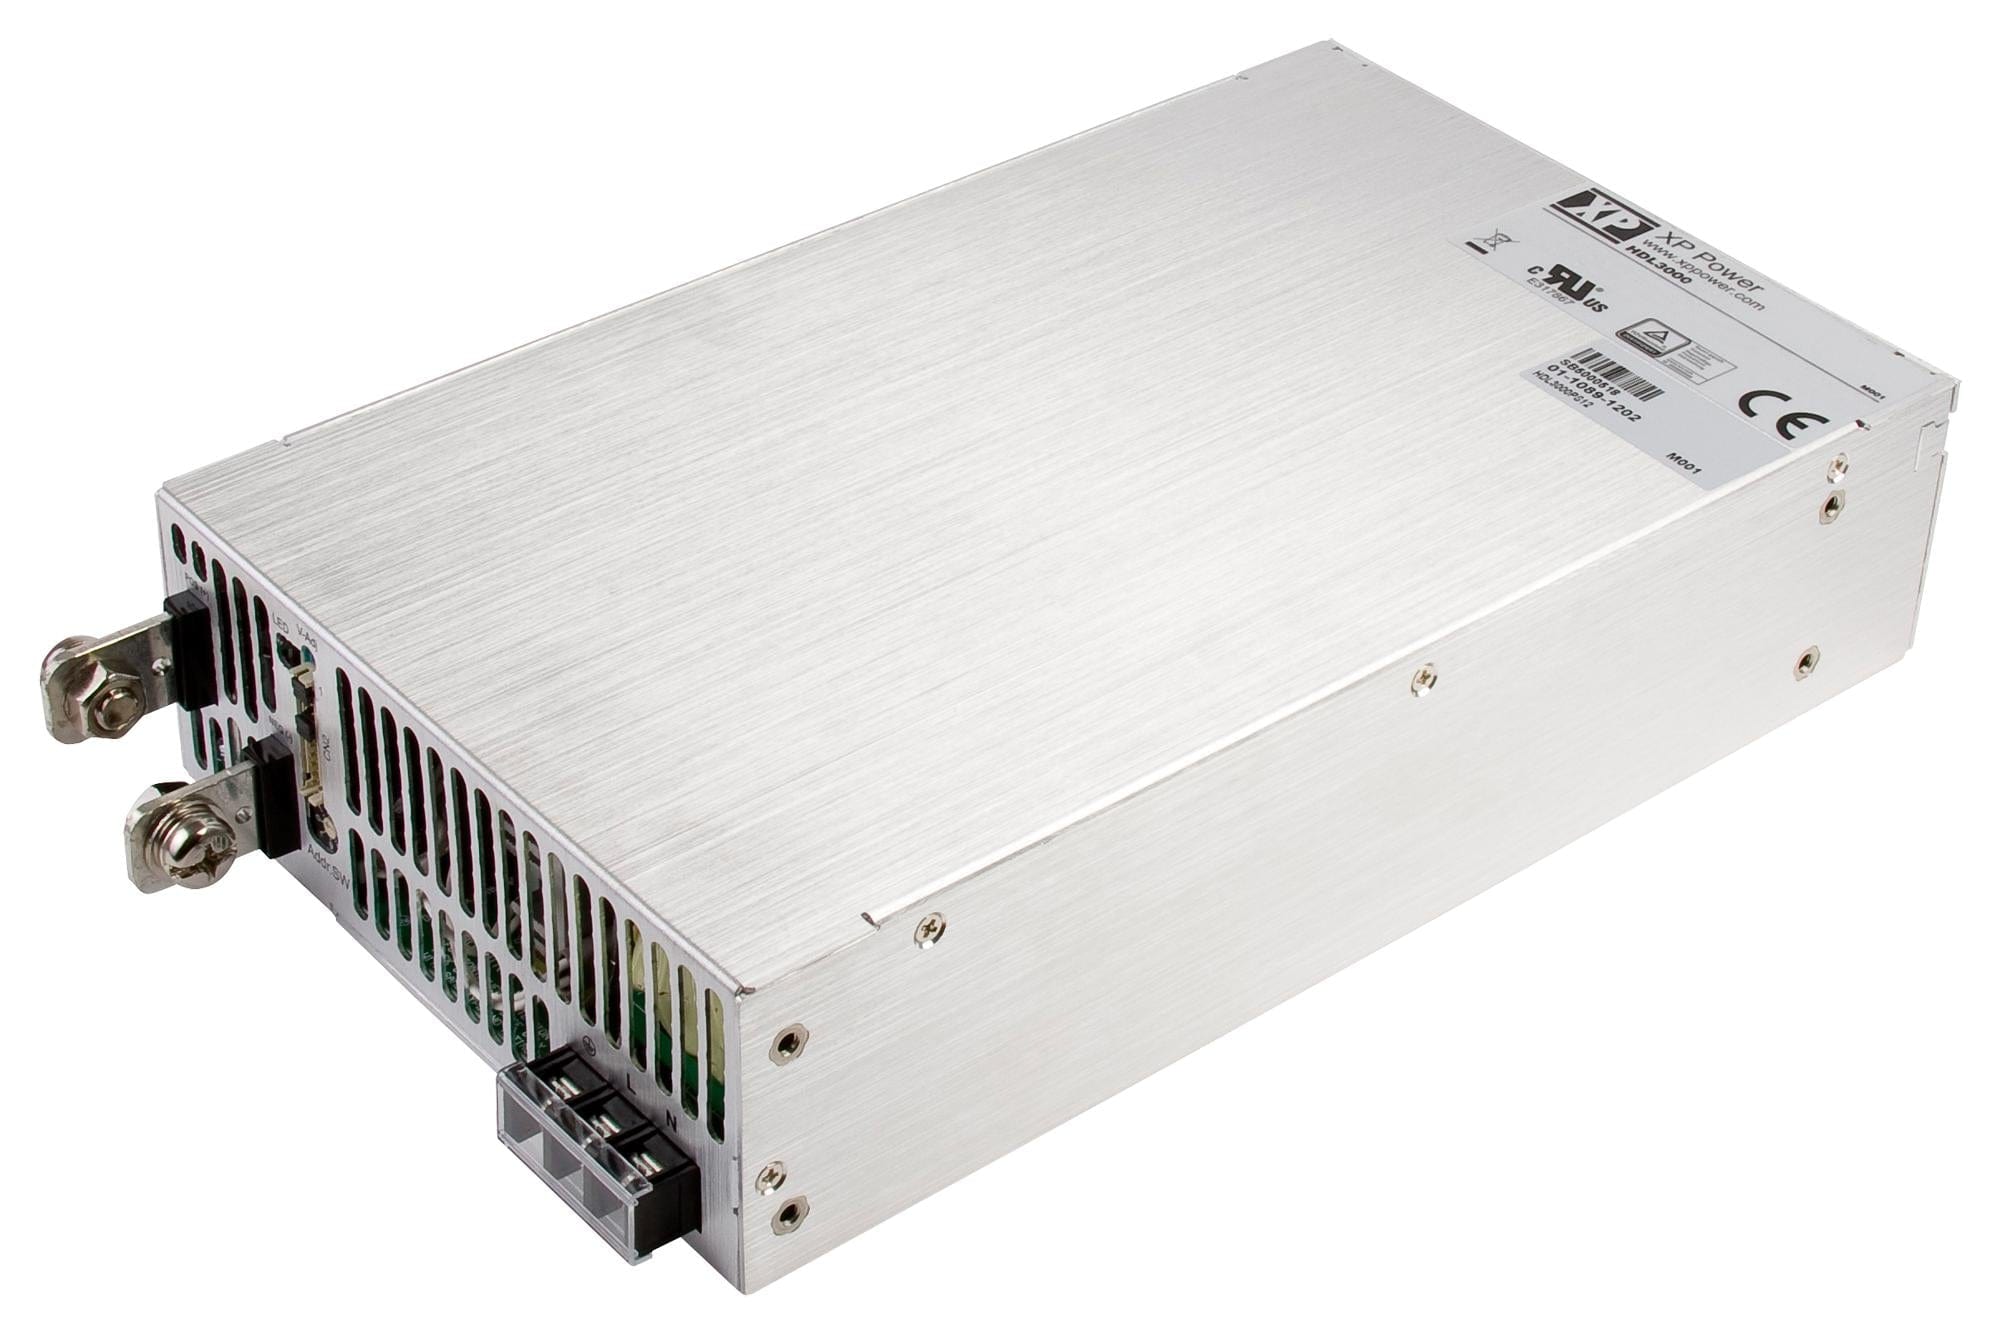 XP POWER Enclosed - Single Output HDL3000PS60 POWER SUPPLY, AC-DC, 60V, 50A XP POWER 3524111 HDL3000PS60